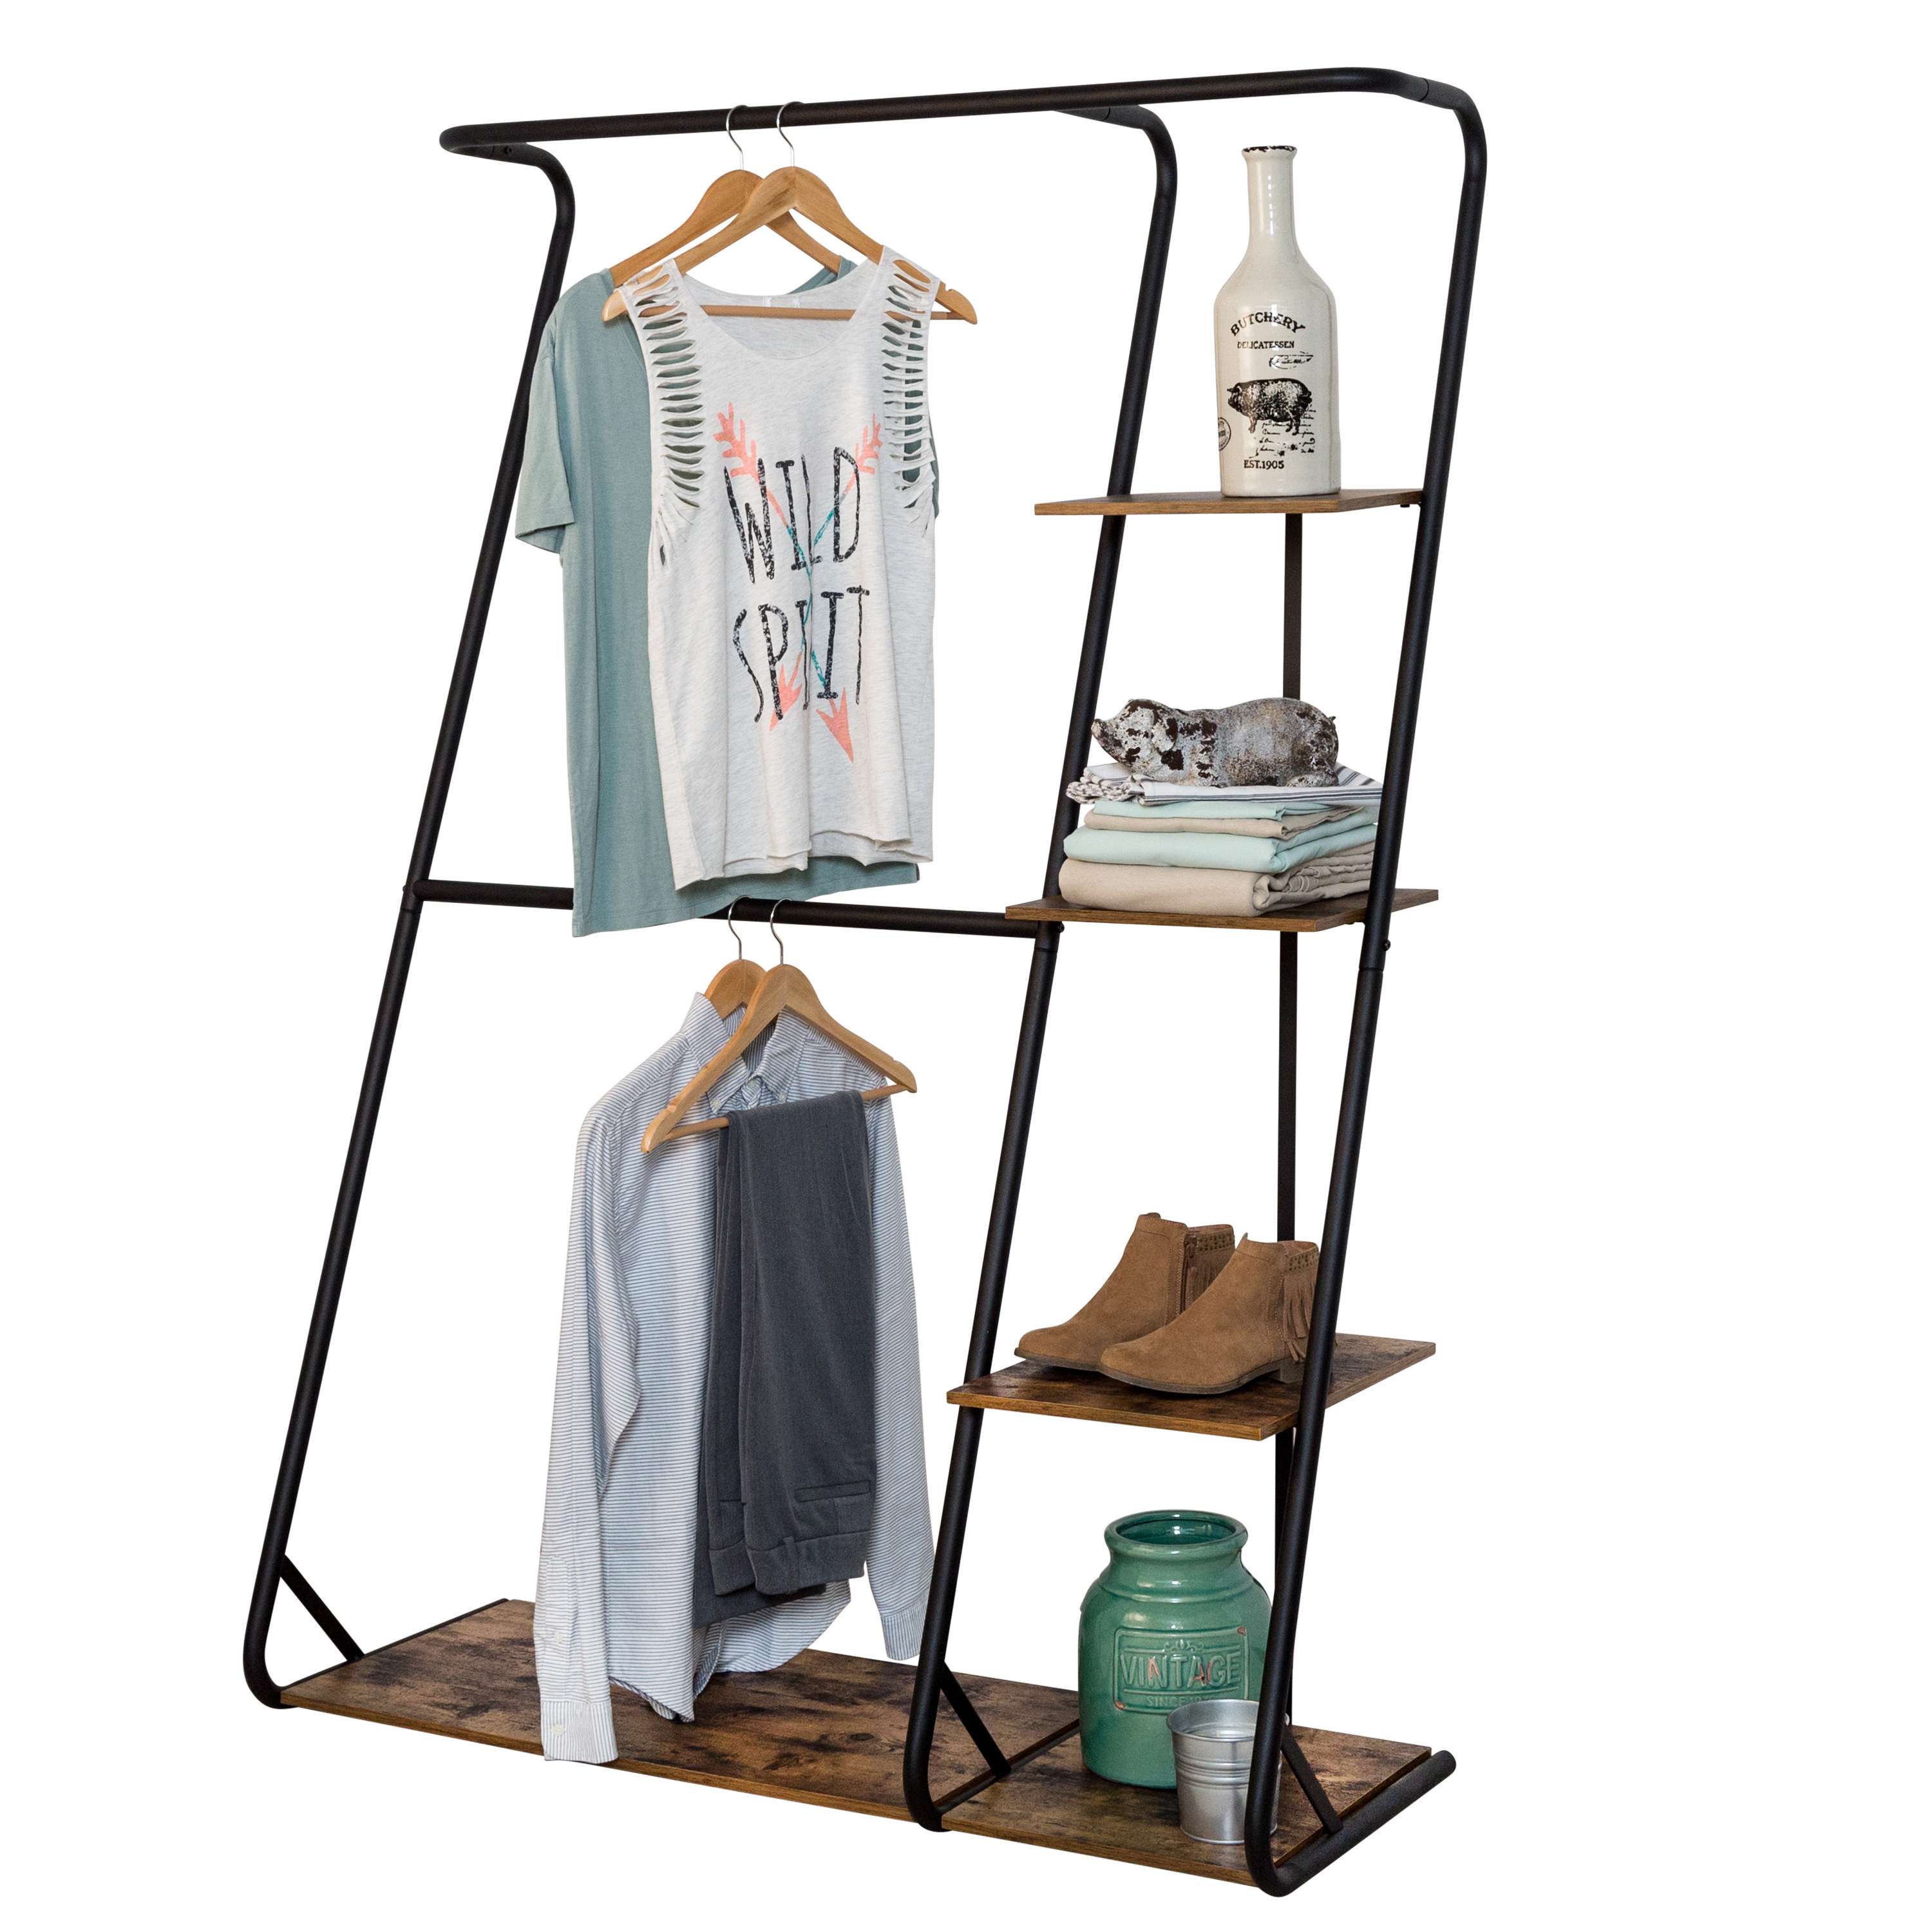 the Z-shaped rack with two levels to hang clothes and four side shelves